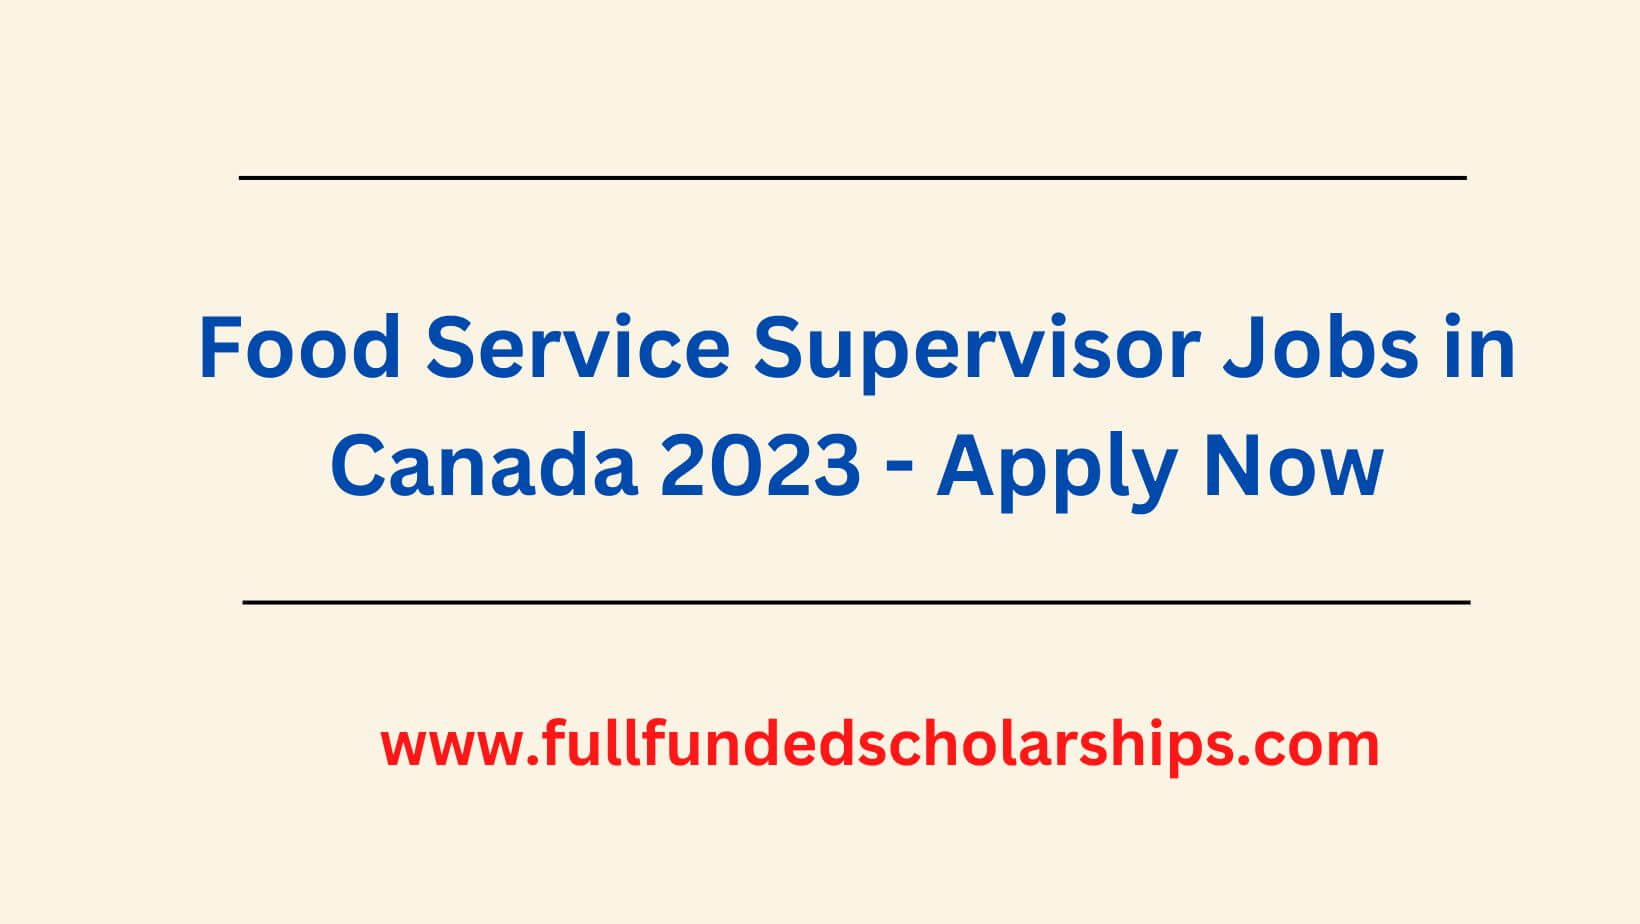 Food Service Supervisor Jobs in Canada 2023 - Apply Now